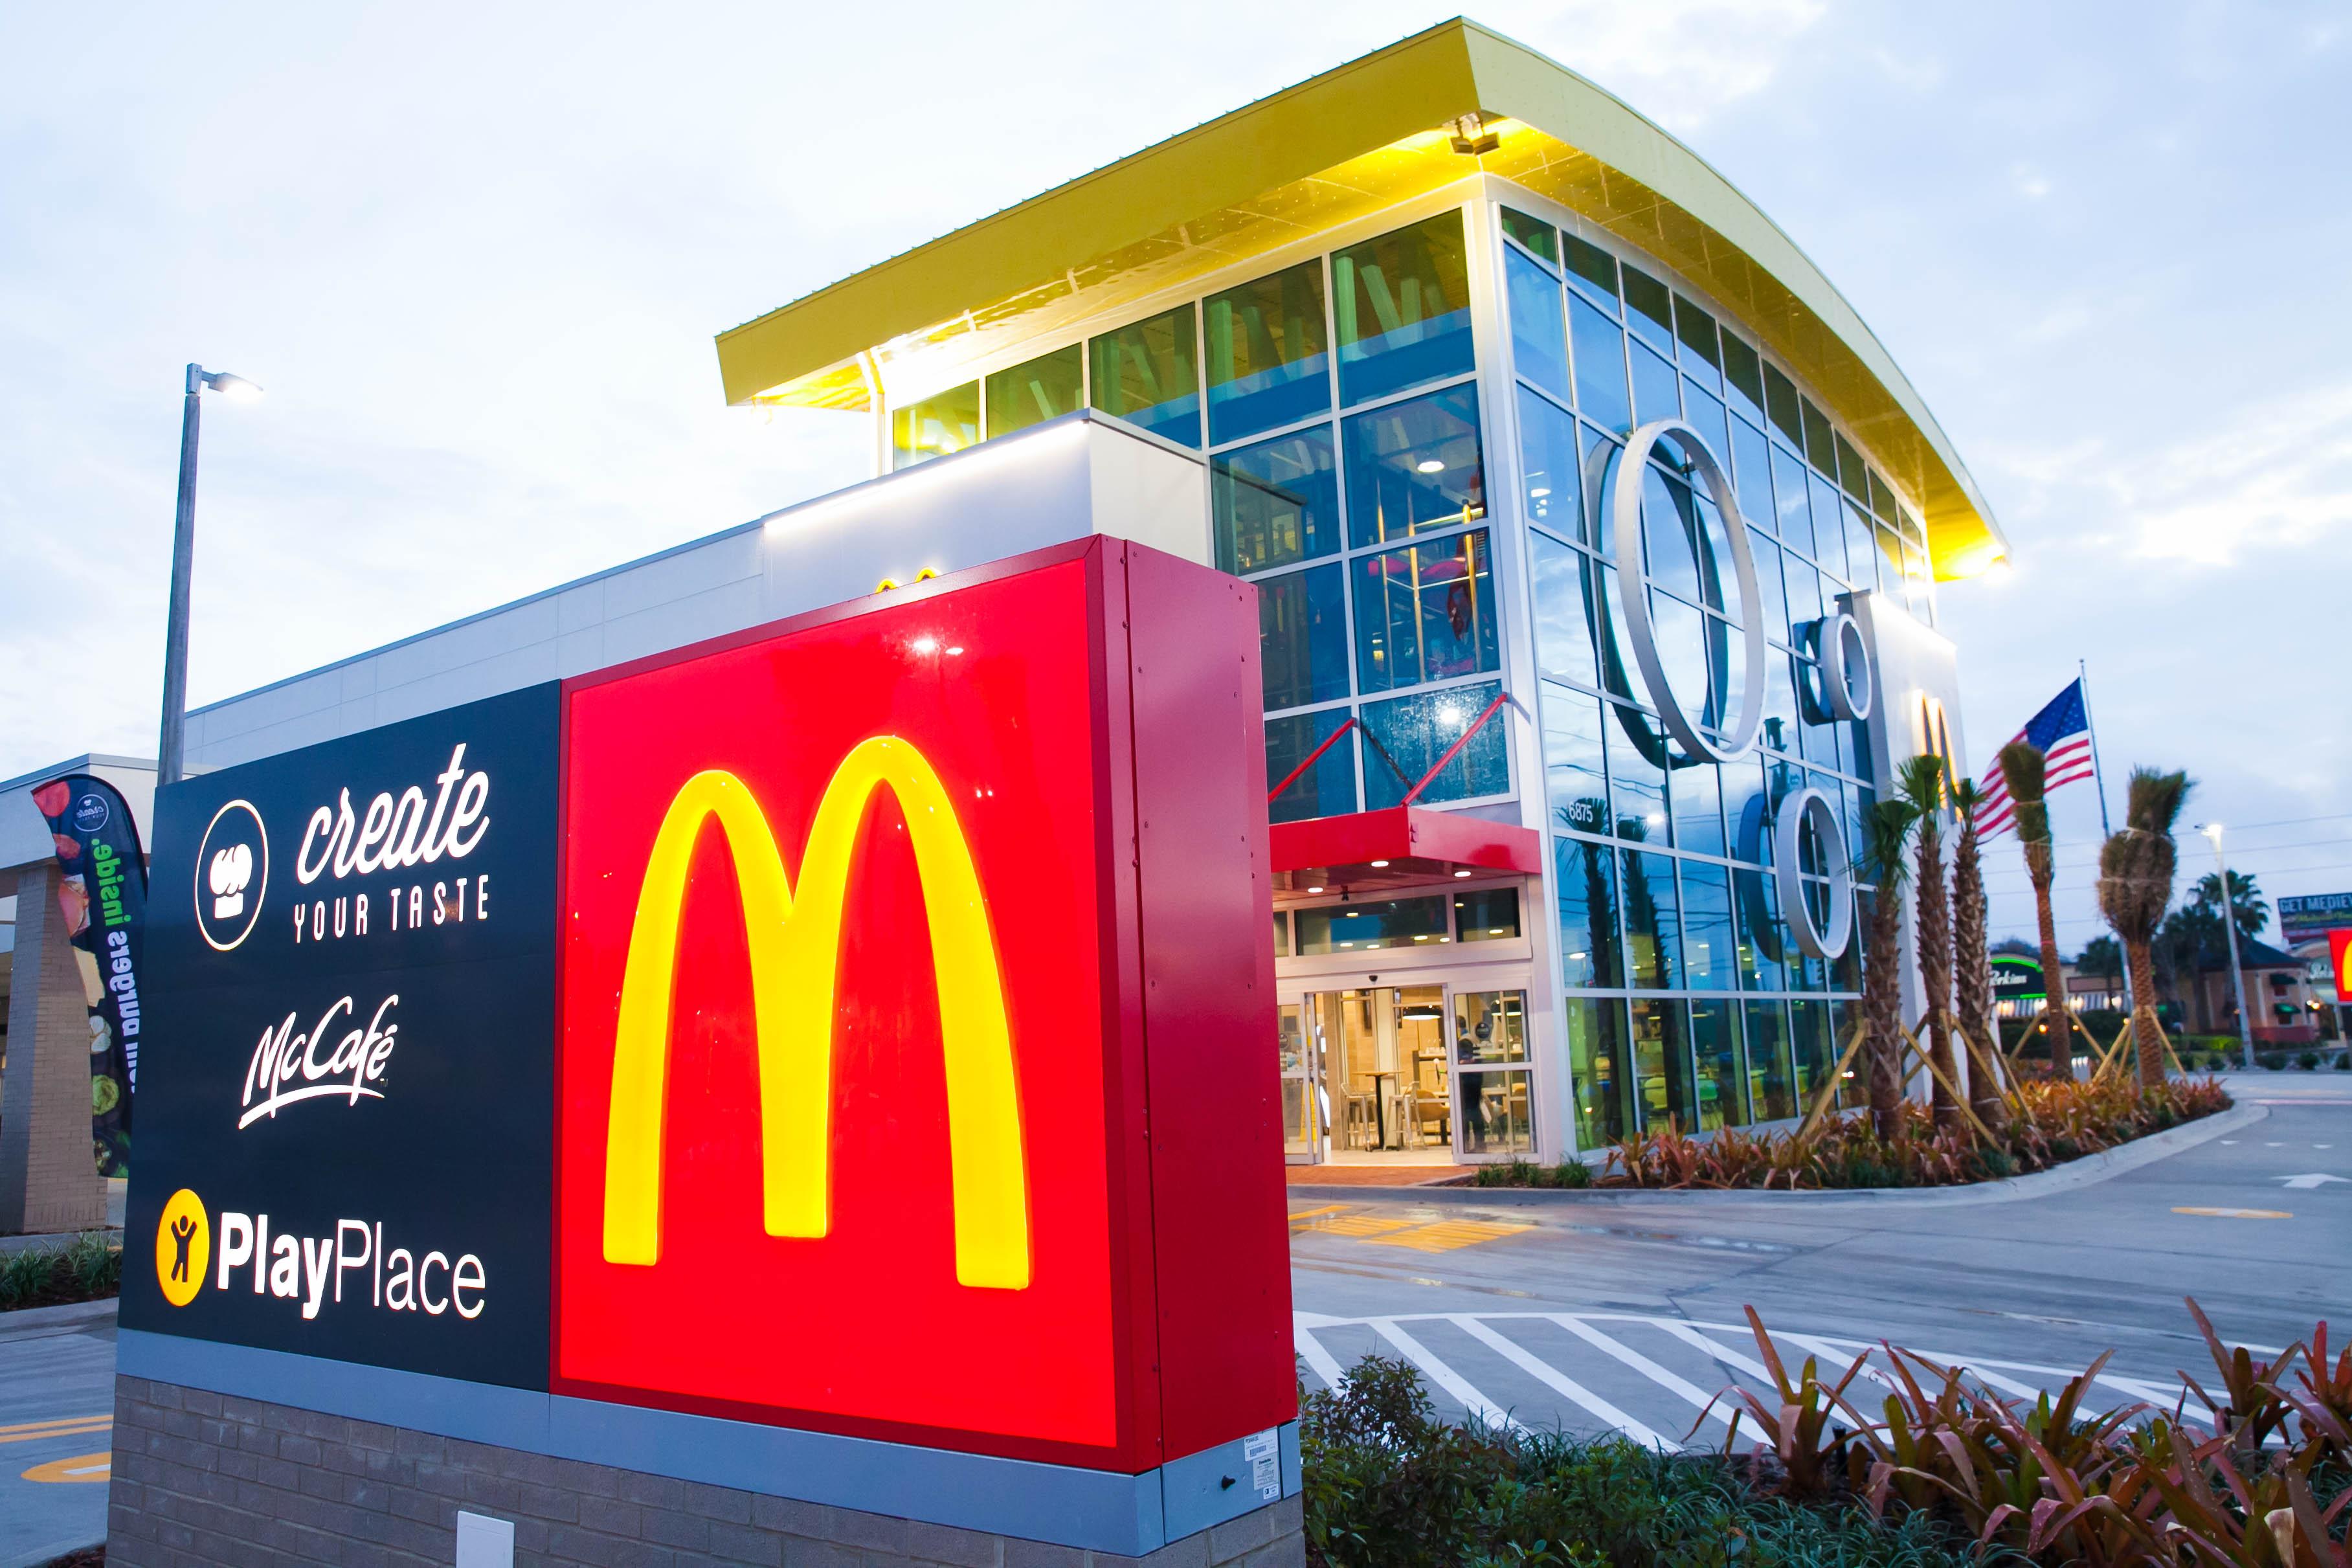 The World's Largest McDonald's Is Located In Orlando, Florida